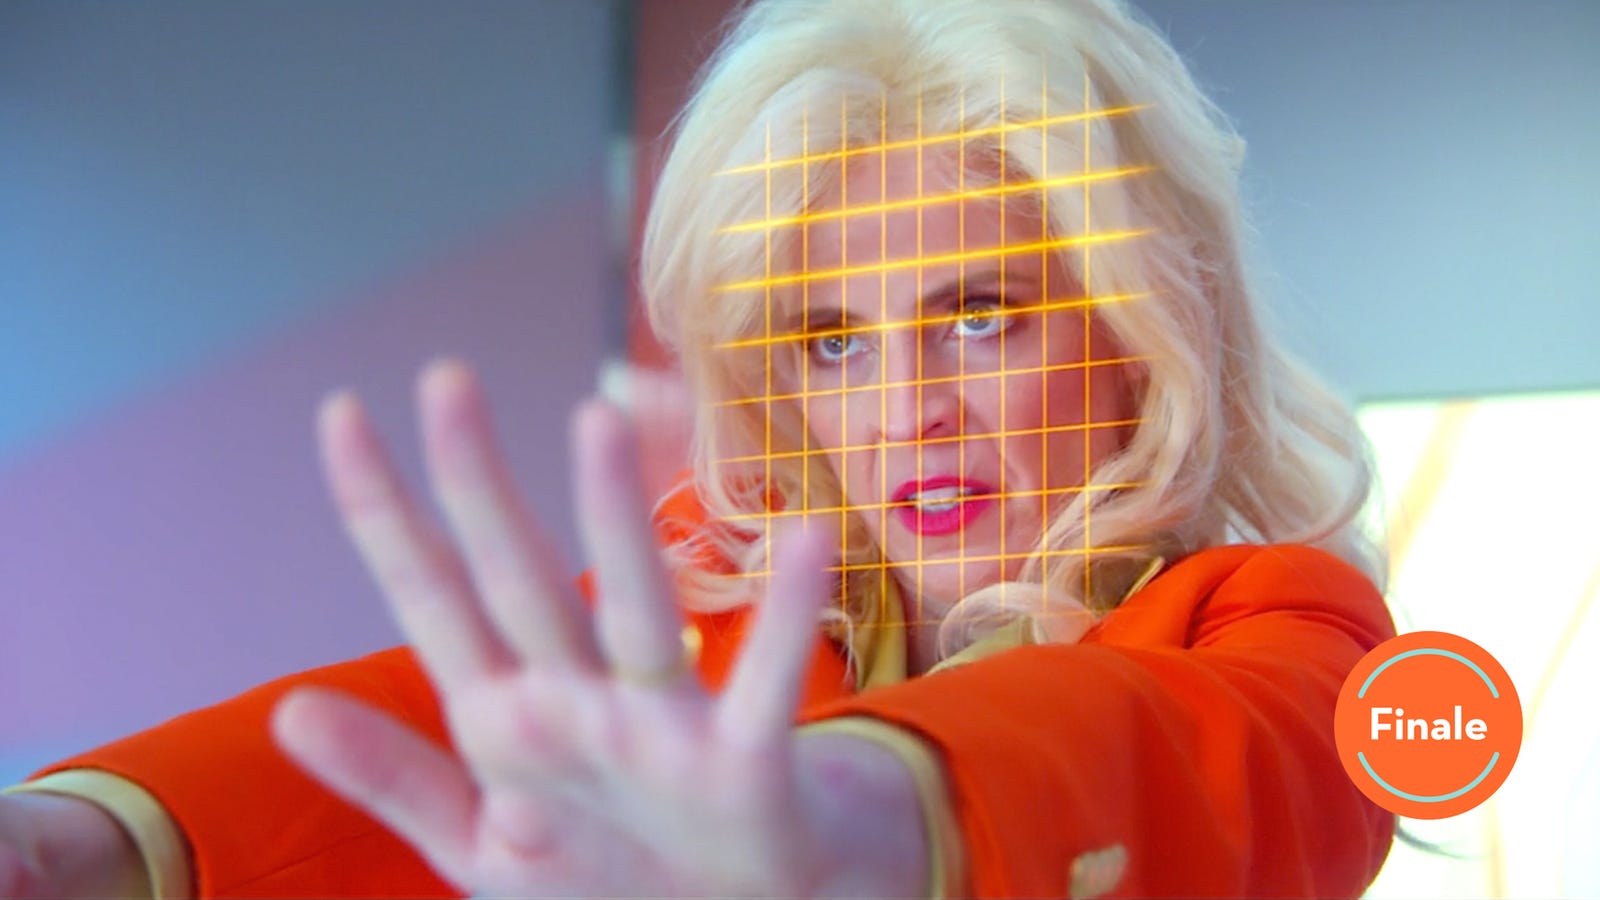 Lady Dynamite S Spectacular Season Finale Defies Expectations